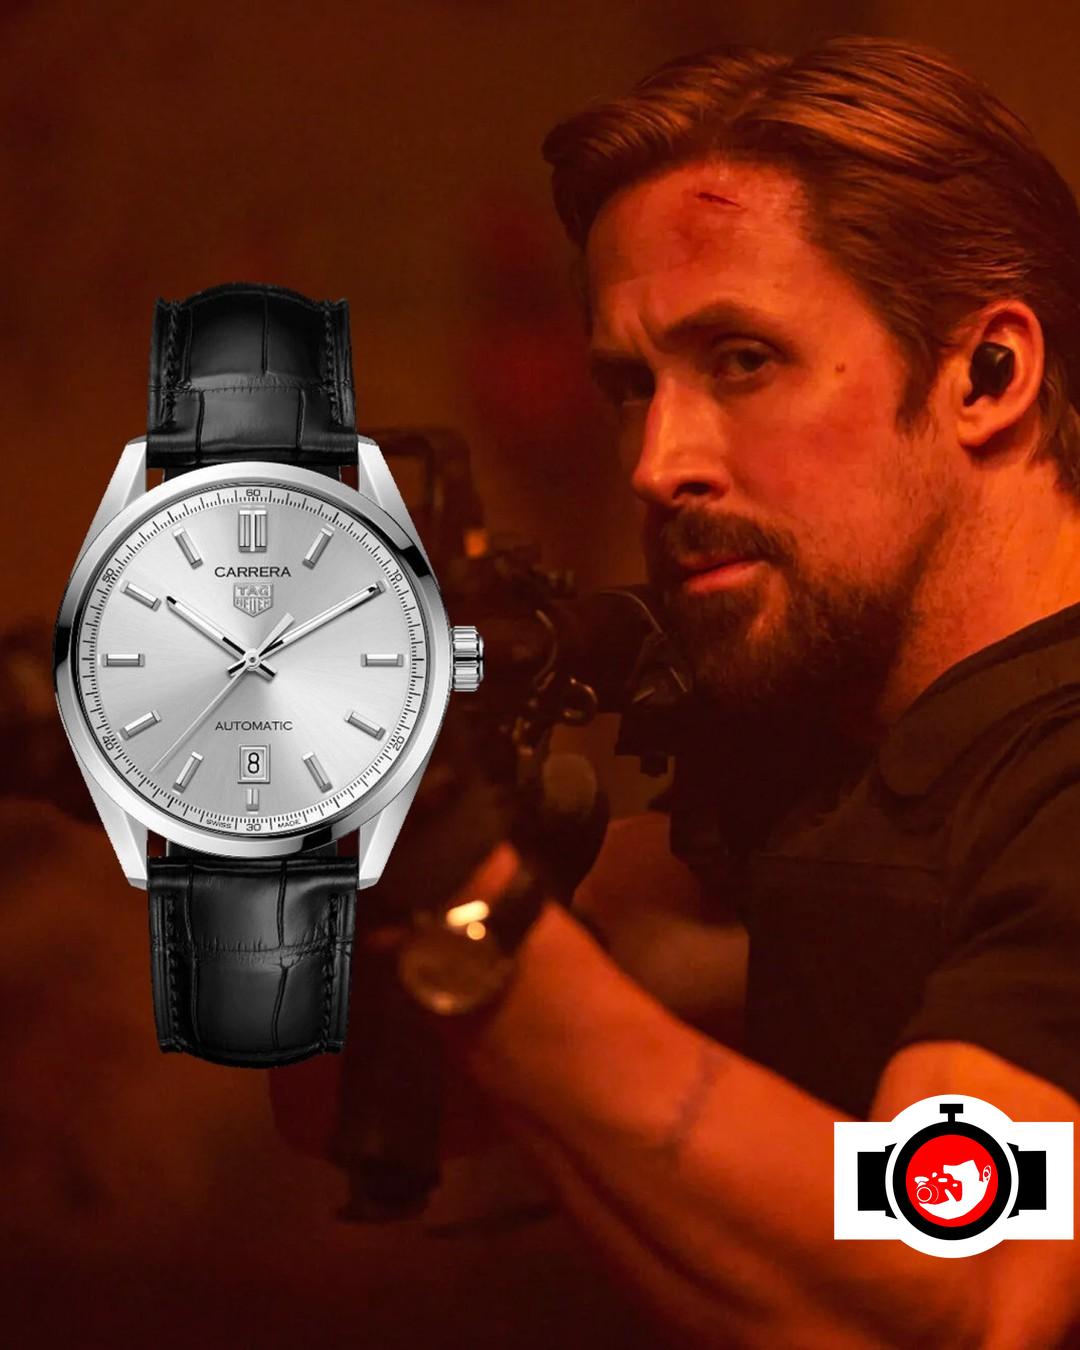 WATCH FACES: Ryan Gosling welcomed into TAG Heuer family at star-studded  Beverly Hills party